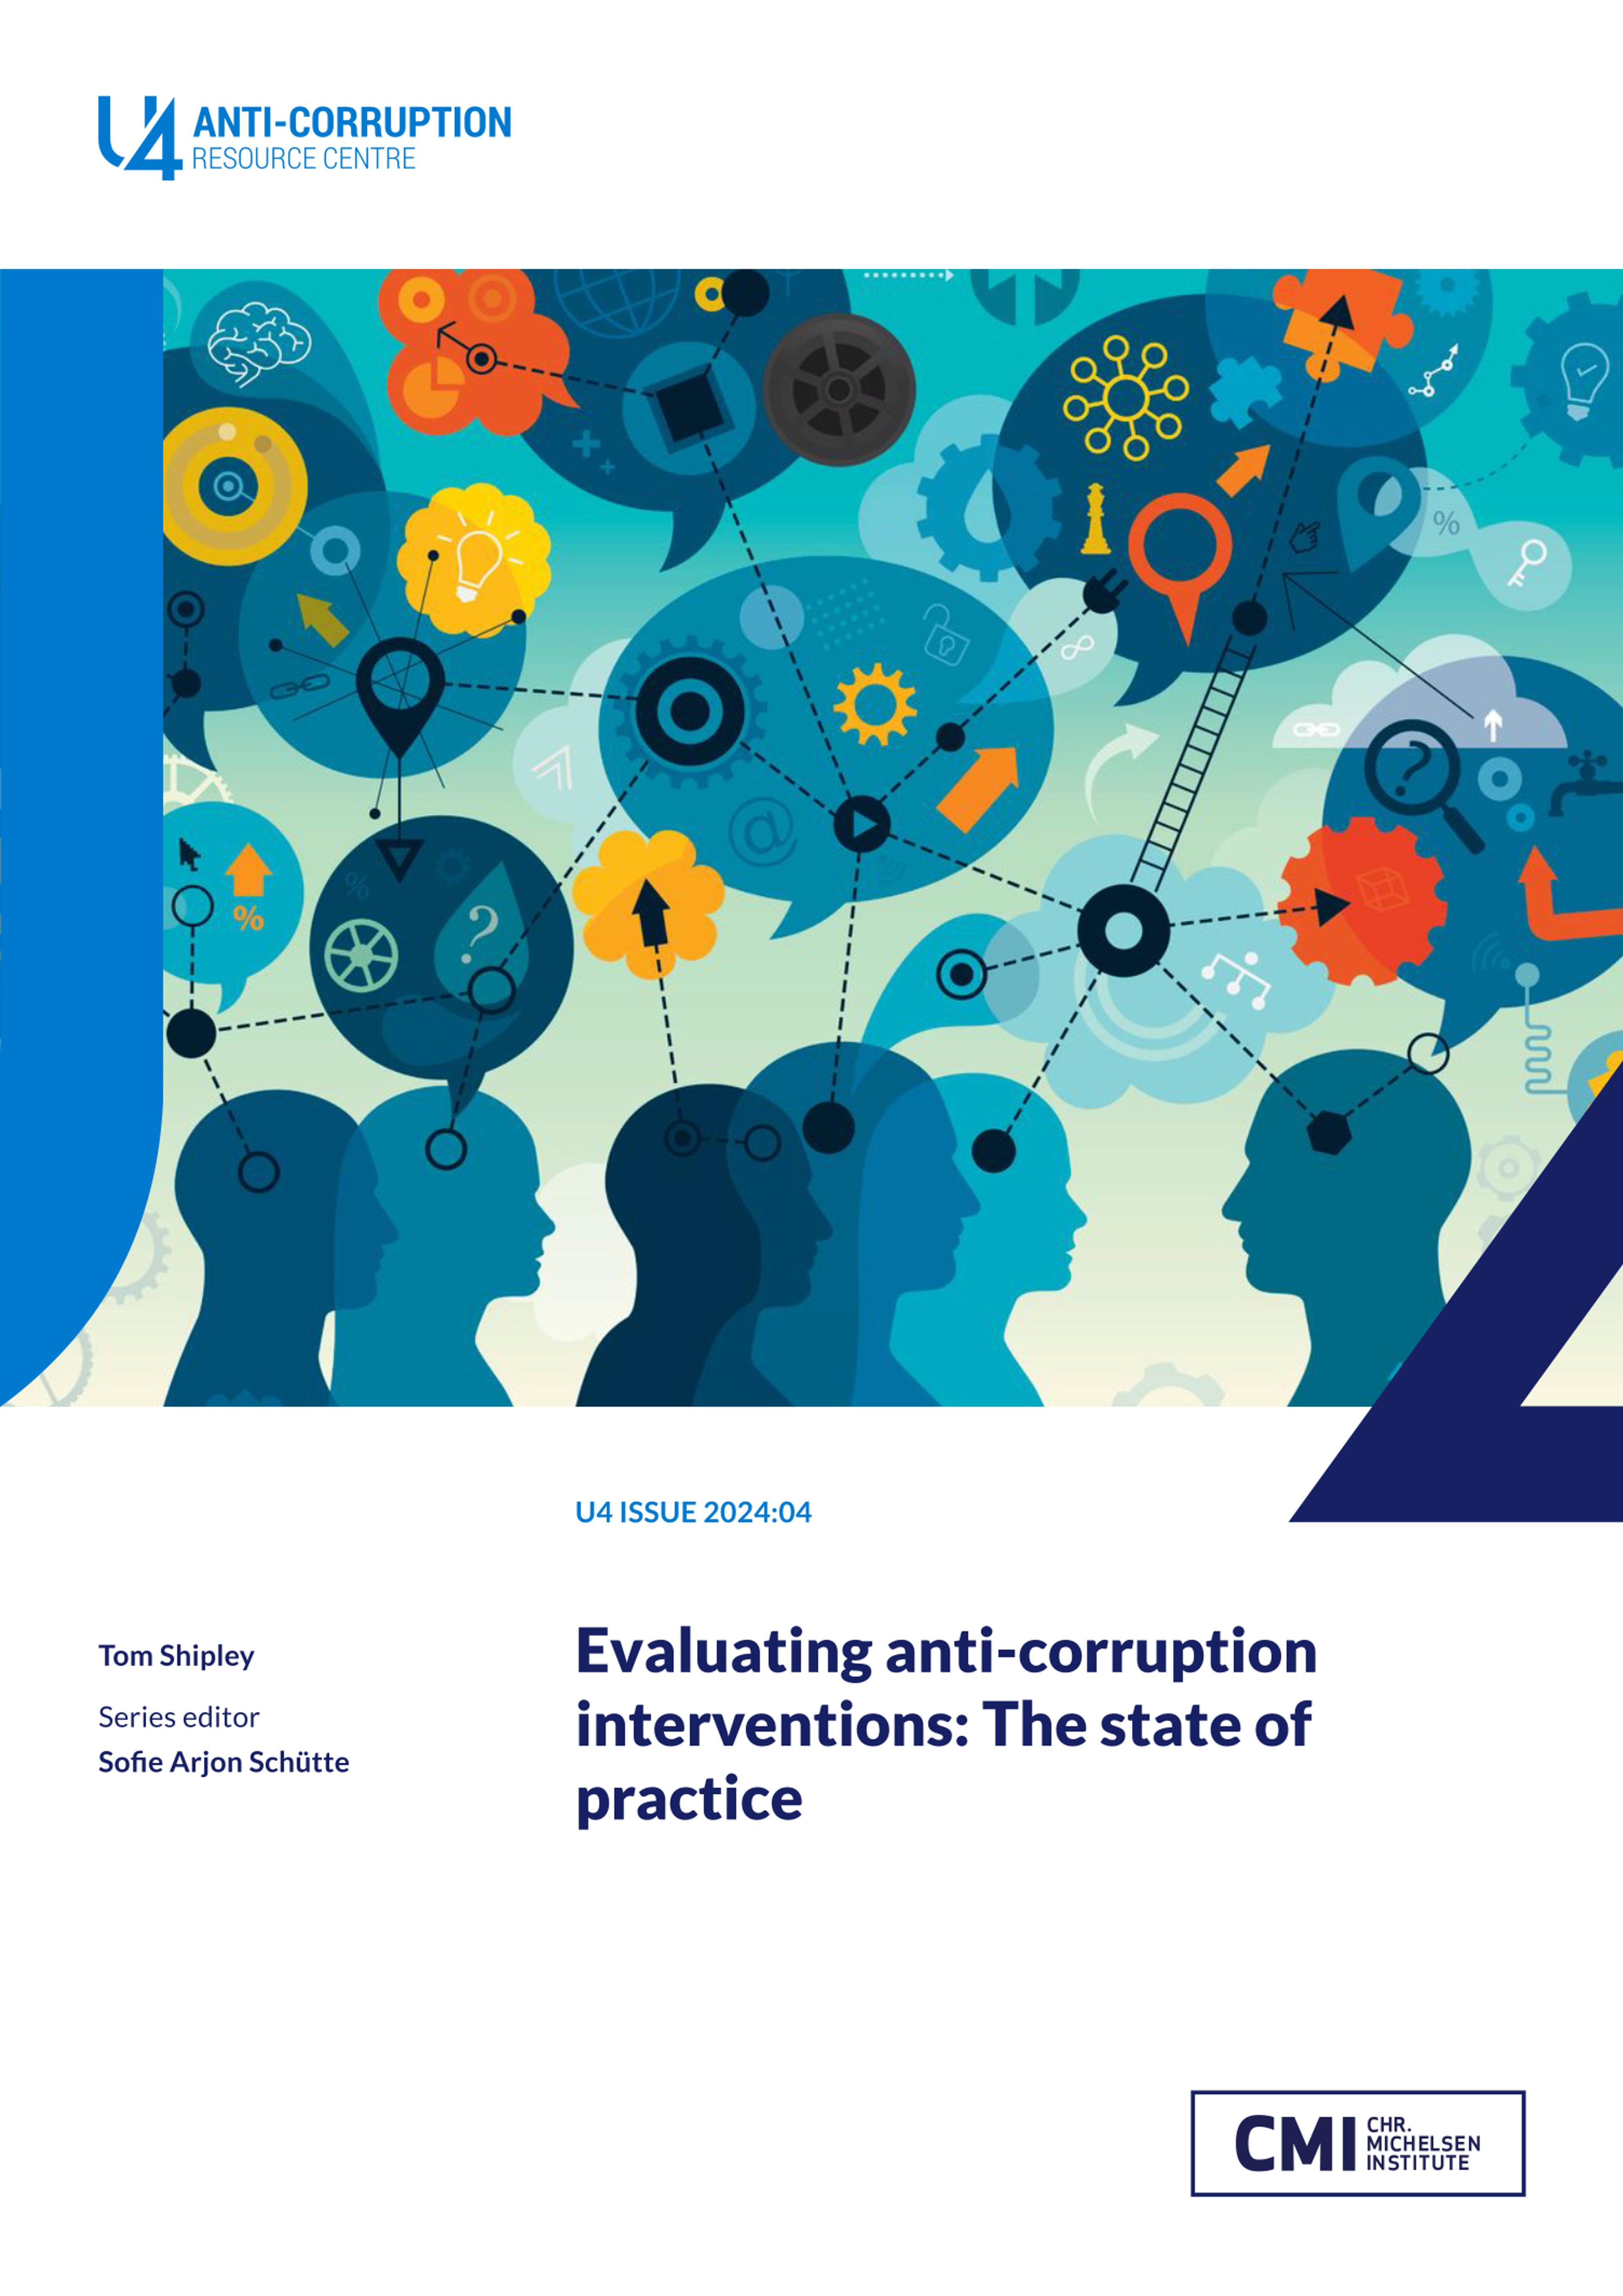 Evaluating anti-corruption interventions: The state of practice